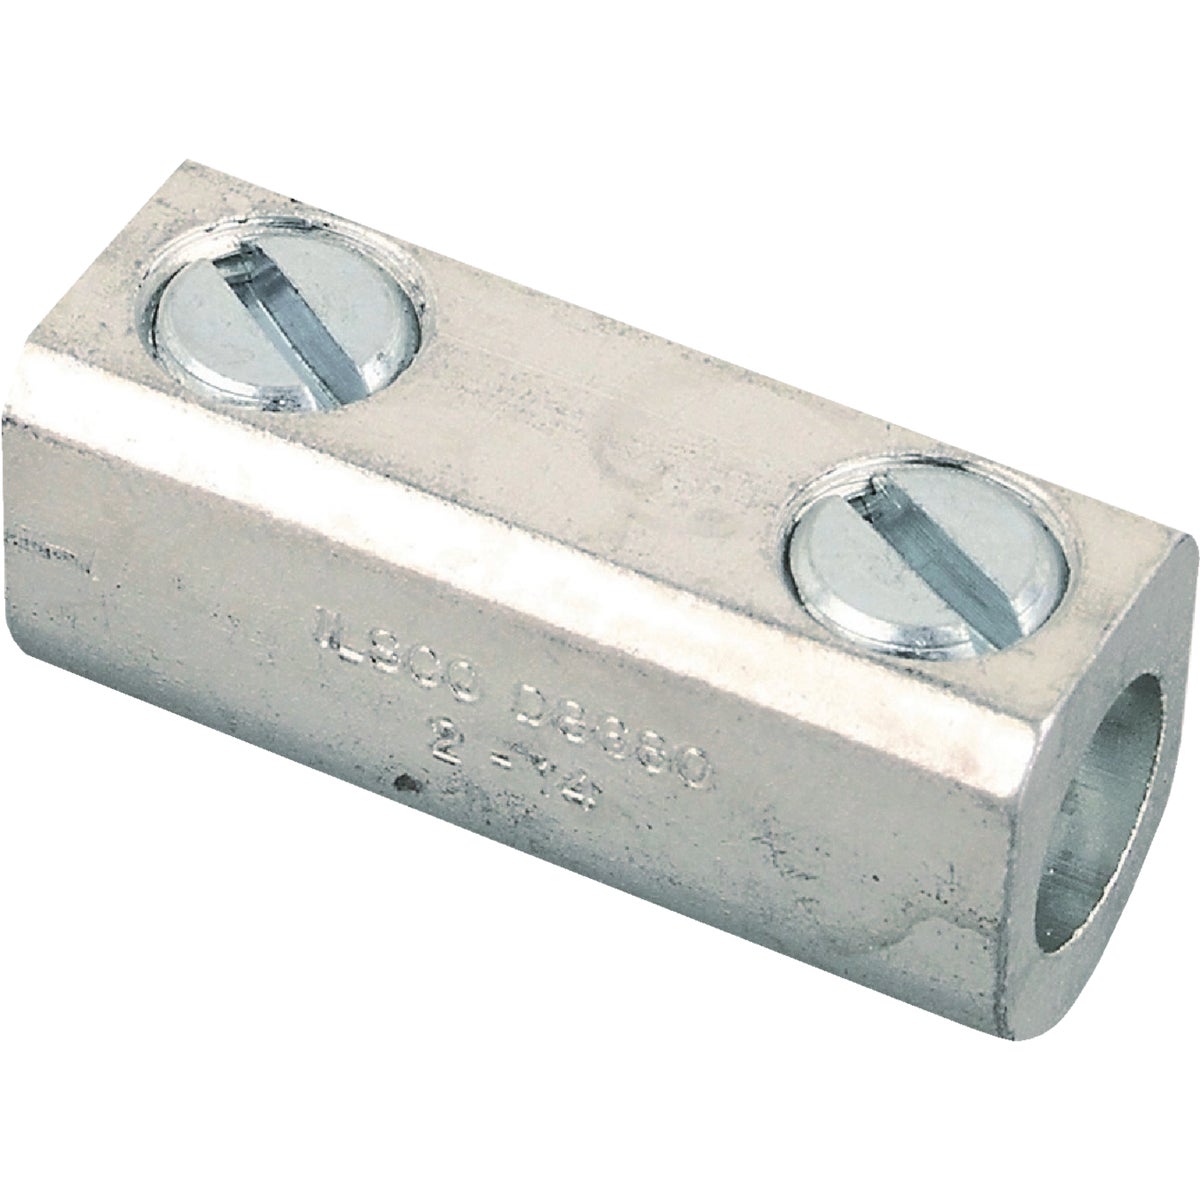 Item 538183, Splicer/reducer with solid barrier wire stop, all aluminum body, tin plated